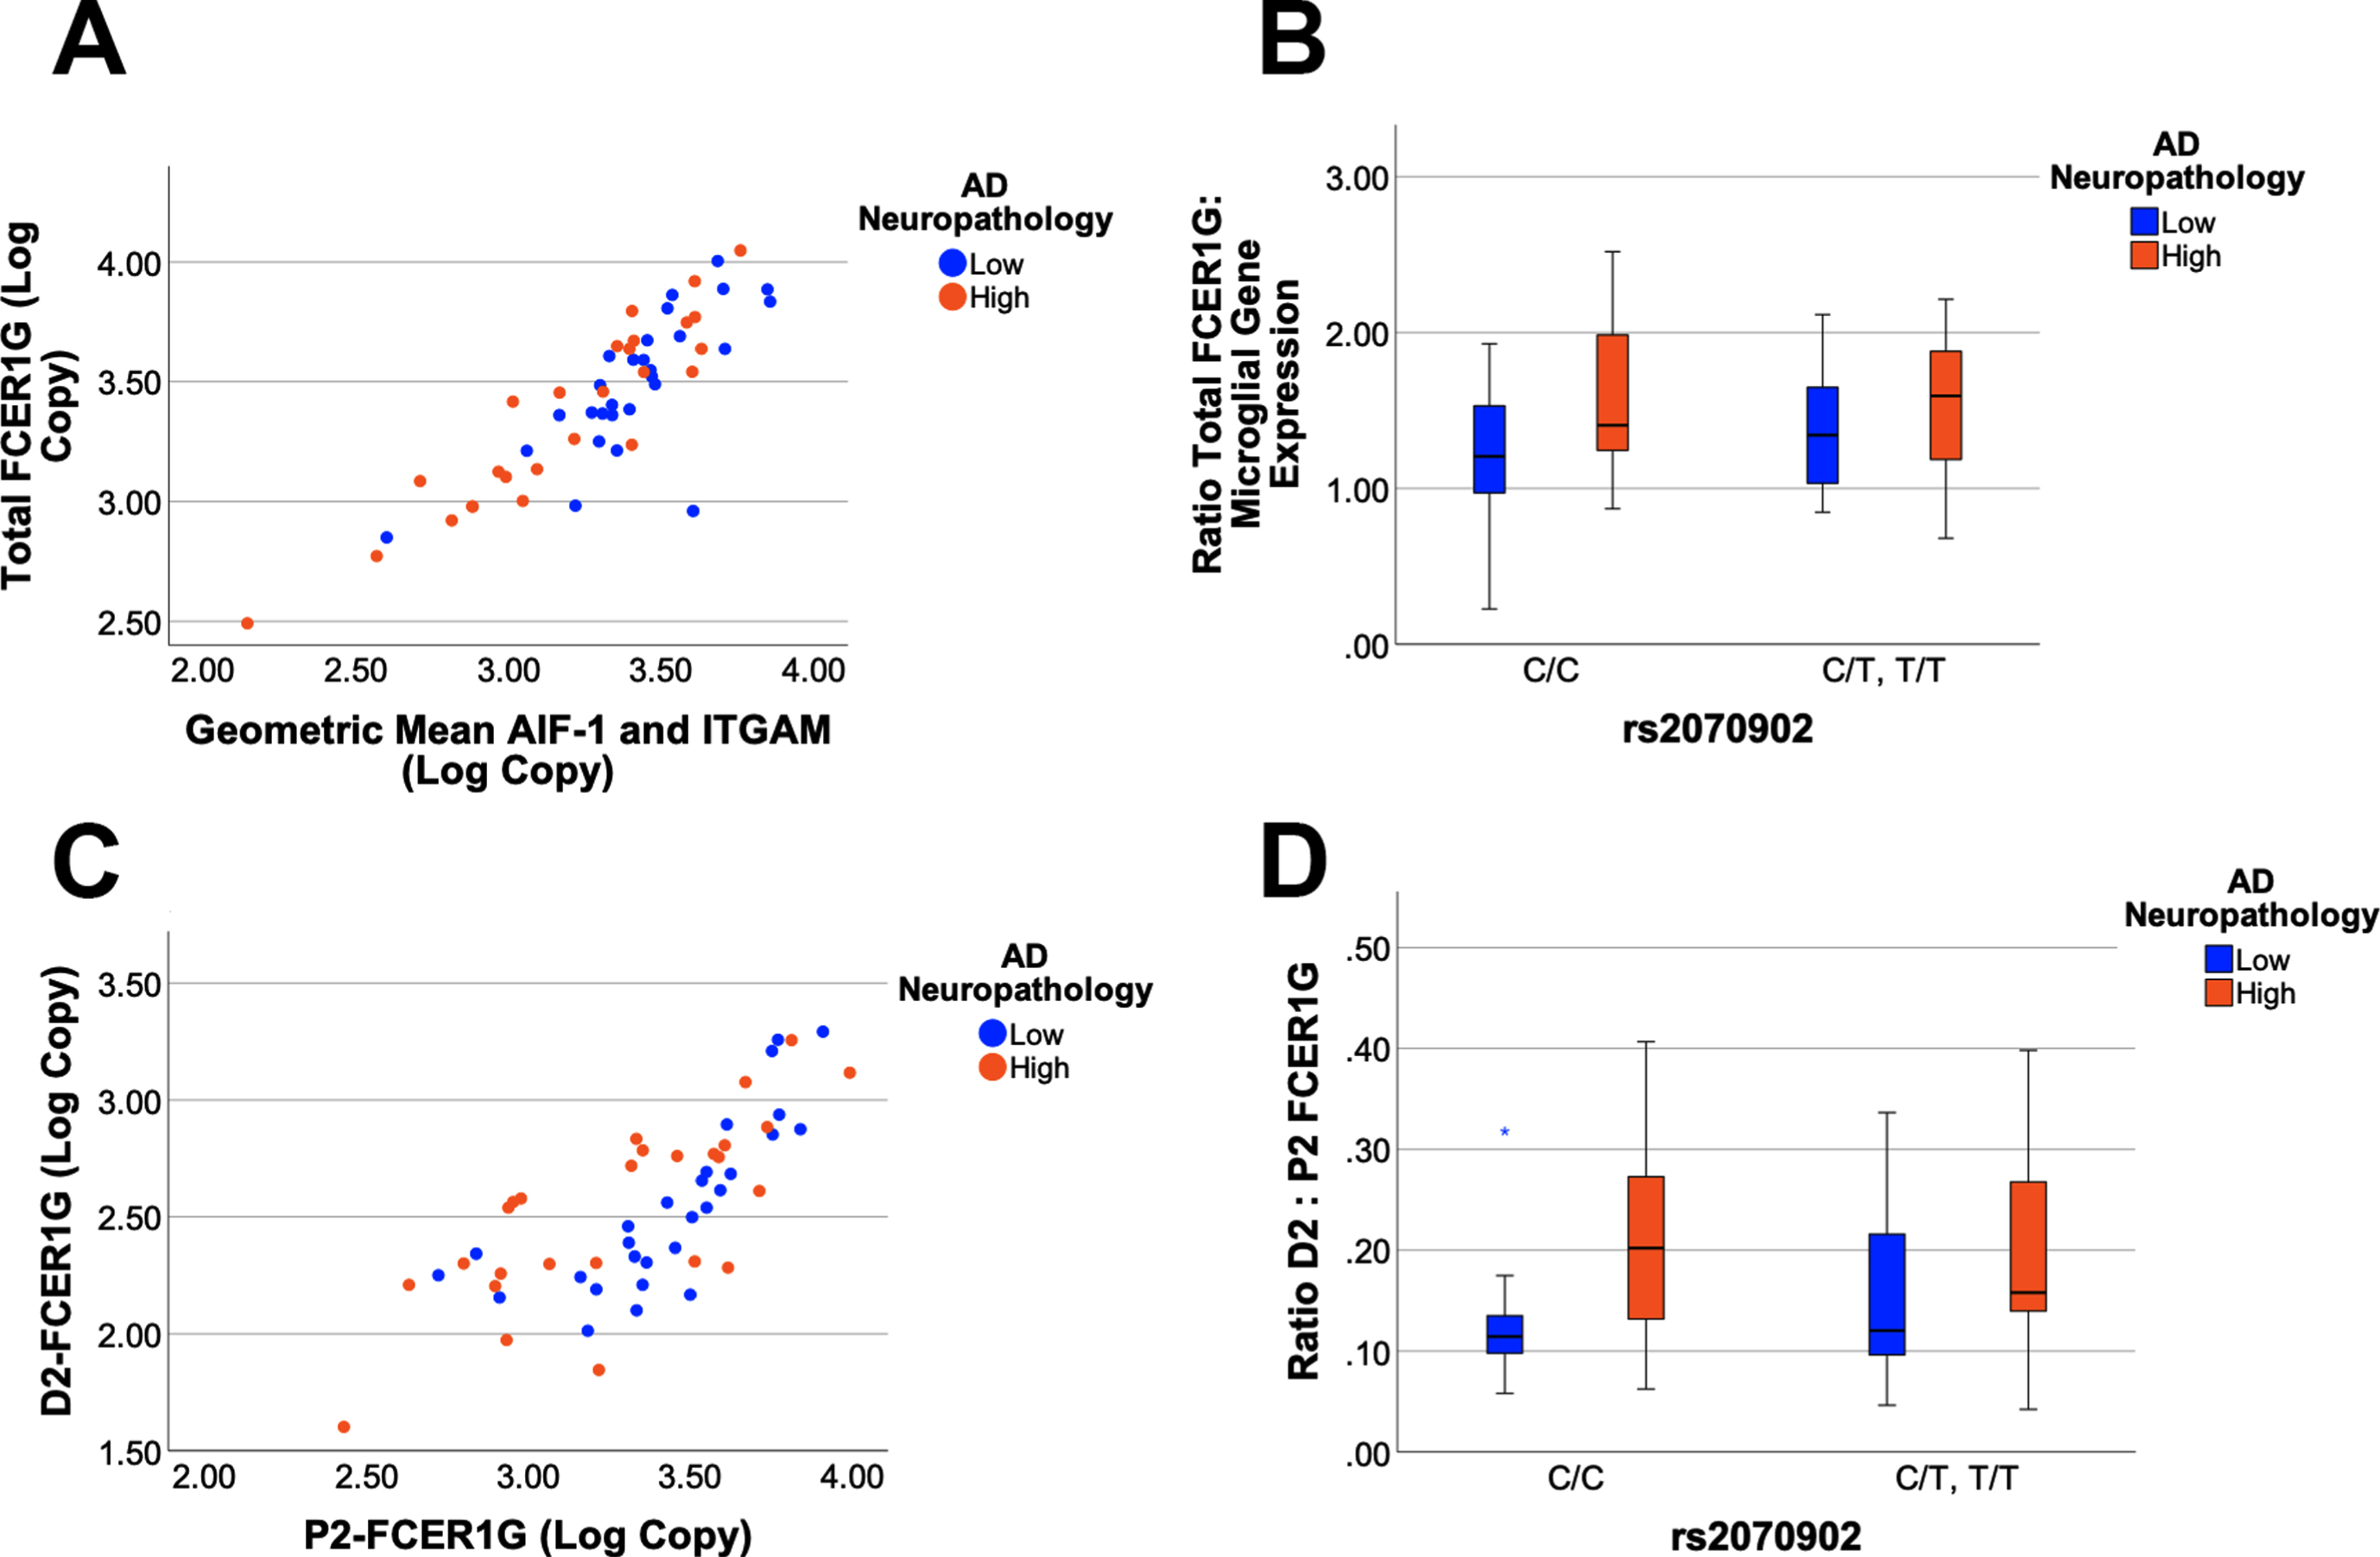 FCER1G isoform expression as a function of AD neuropathology and genetics. Total FCER1G expression correlates strongly with the expression of microglial genes (p < 0.0001, r2 = 0.740), which are modeled as the geometric mean of mean of AIF-1 and ITGAM expression (A). A General Linear Model analysis found that the ratio of total FCER1G: microglial gene expression is increased with AD neuropathology (p = 0.04) but not associated with rs2070902 (p > 0.05) (B). The expression of D2-FCER1G correlated well with P2-FCER1G (p < 0.0001, r2 = 0.563) (C). The ratio of D2- FCER1G: P2-FCER1G expression was increased in samples with high AD neuropathology (p = 0.02) but was not associated with rs2070902 (p > 0.05) (D). In the box plots, the median and middle interquartile range are represented by the horizontal bar and accompanying box, respectively. The whiskers demarcate 1.5 times the interquartile range while an asterisk (D) denotes outliers beyond this range.